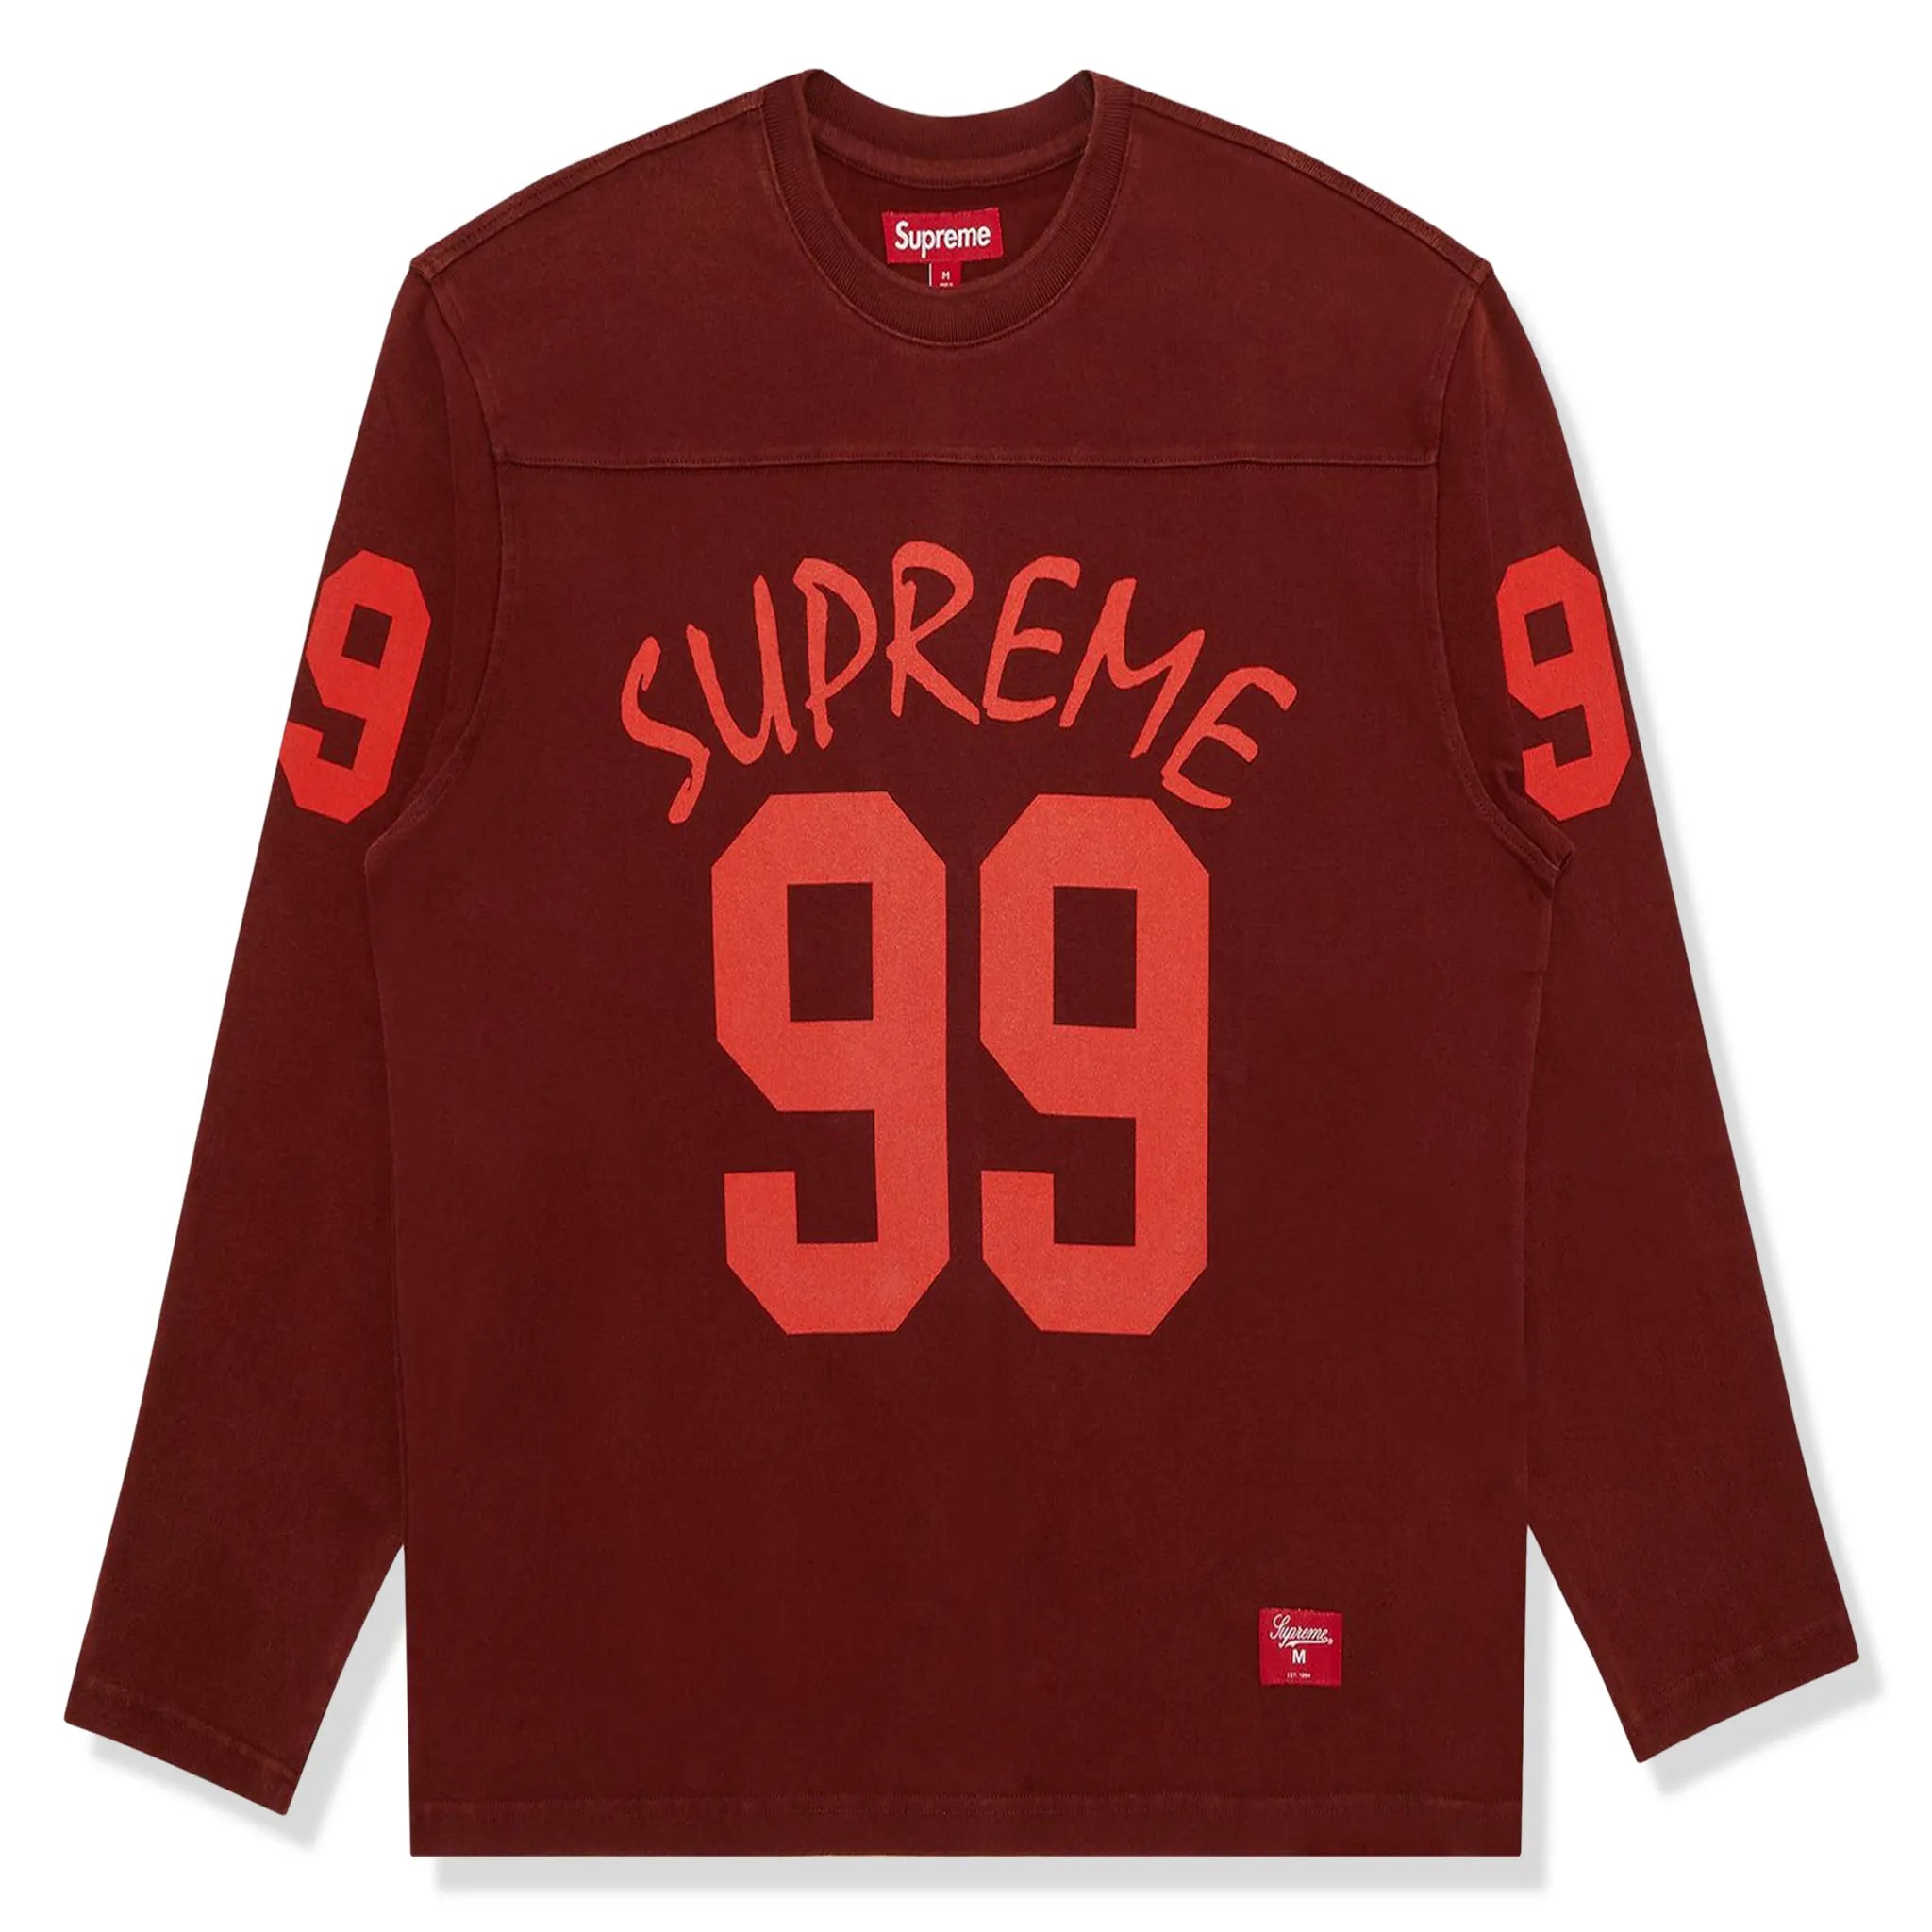 Front view of Supreme 99 L/S Maroon Football T Shirt